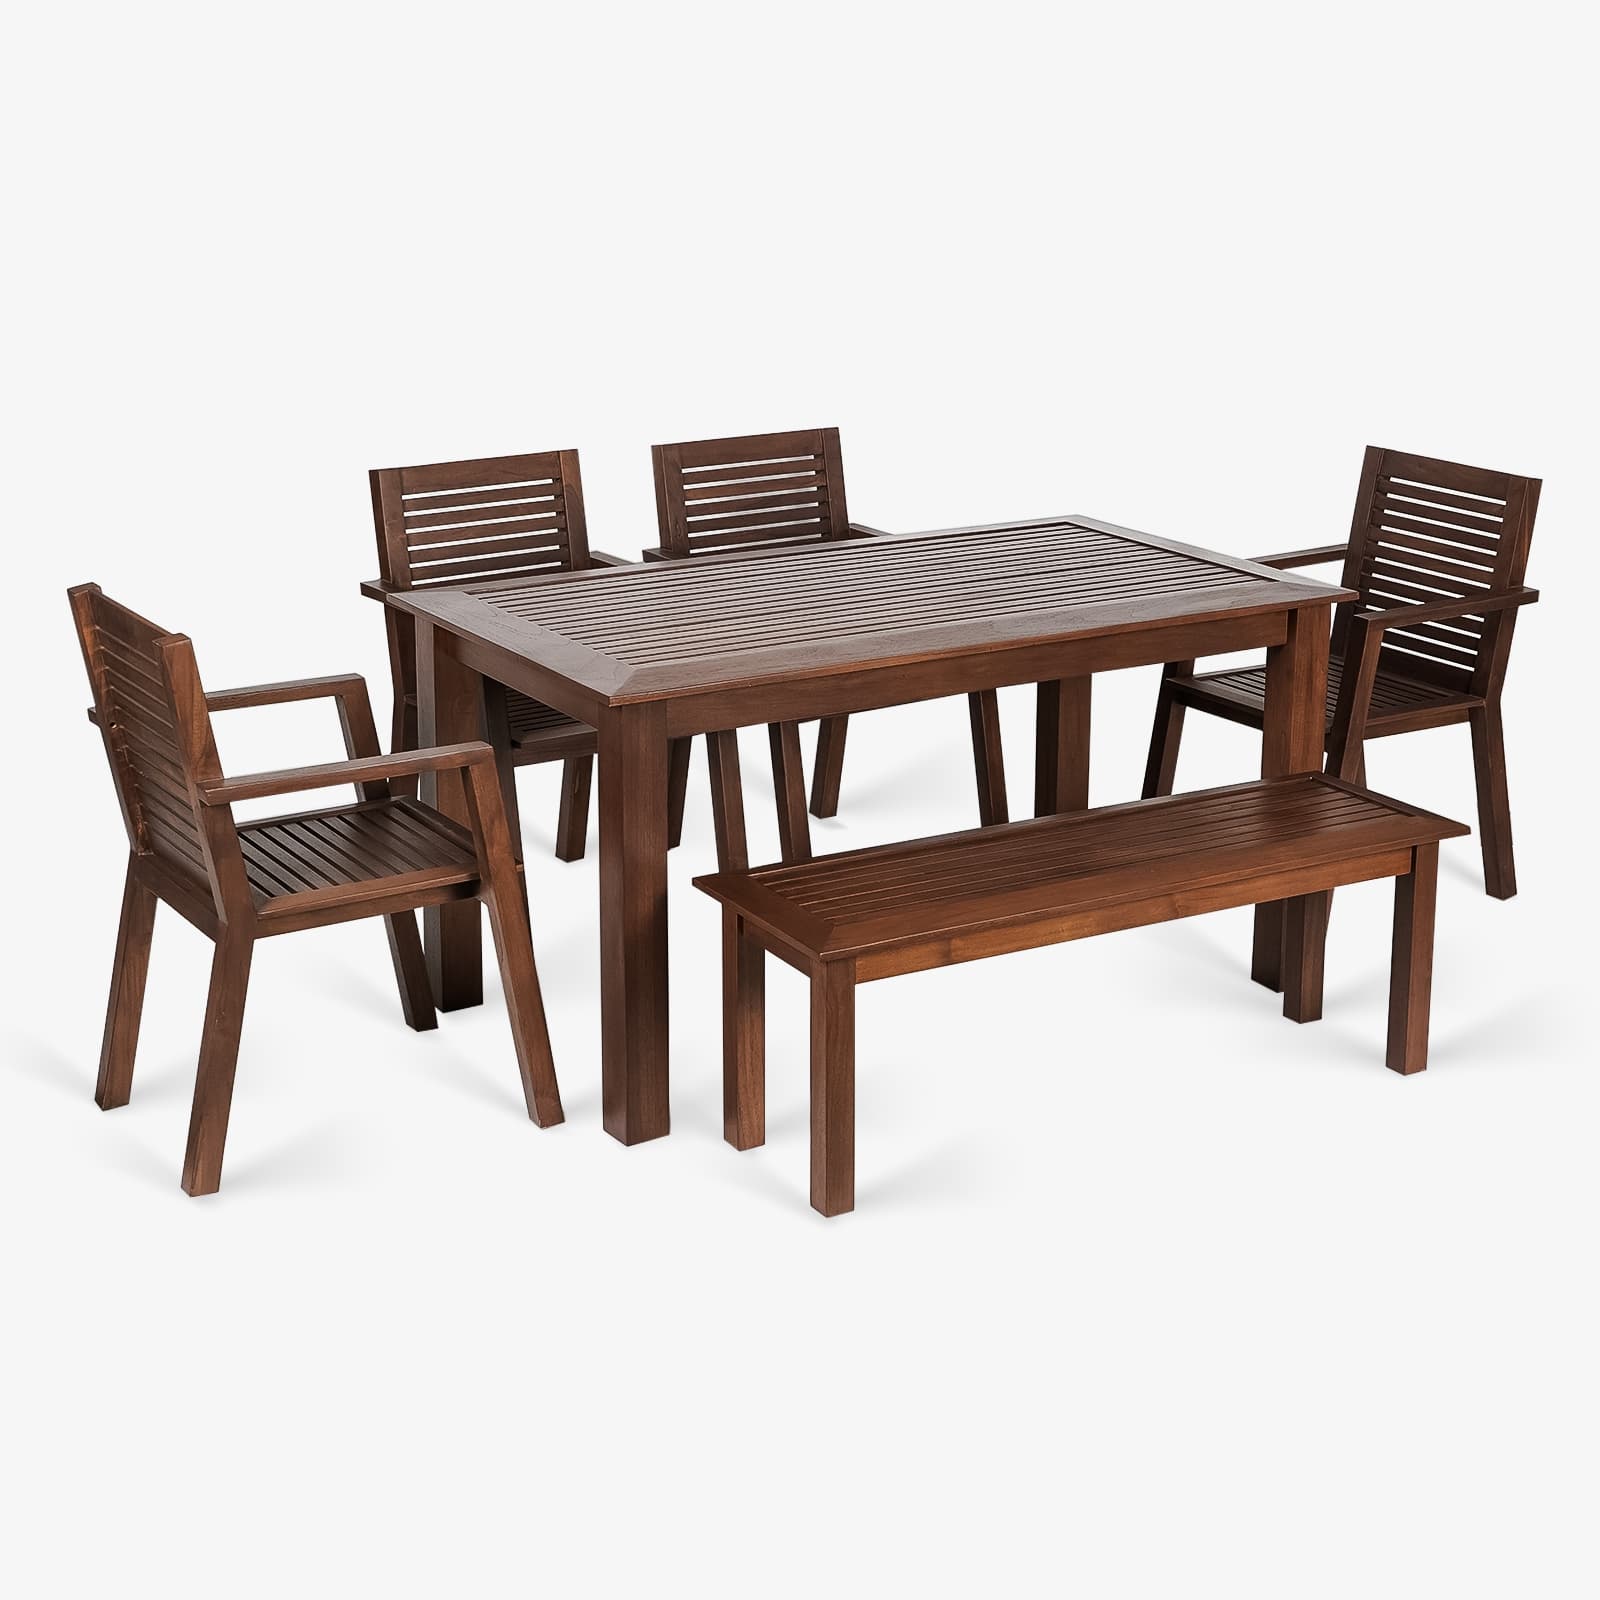 Alfresco Teak wood Dining Table With 4 Arm Chairs And Bench with white background